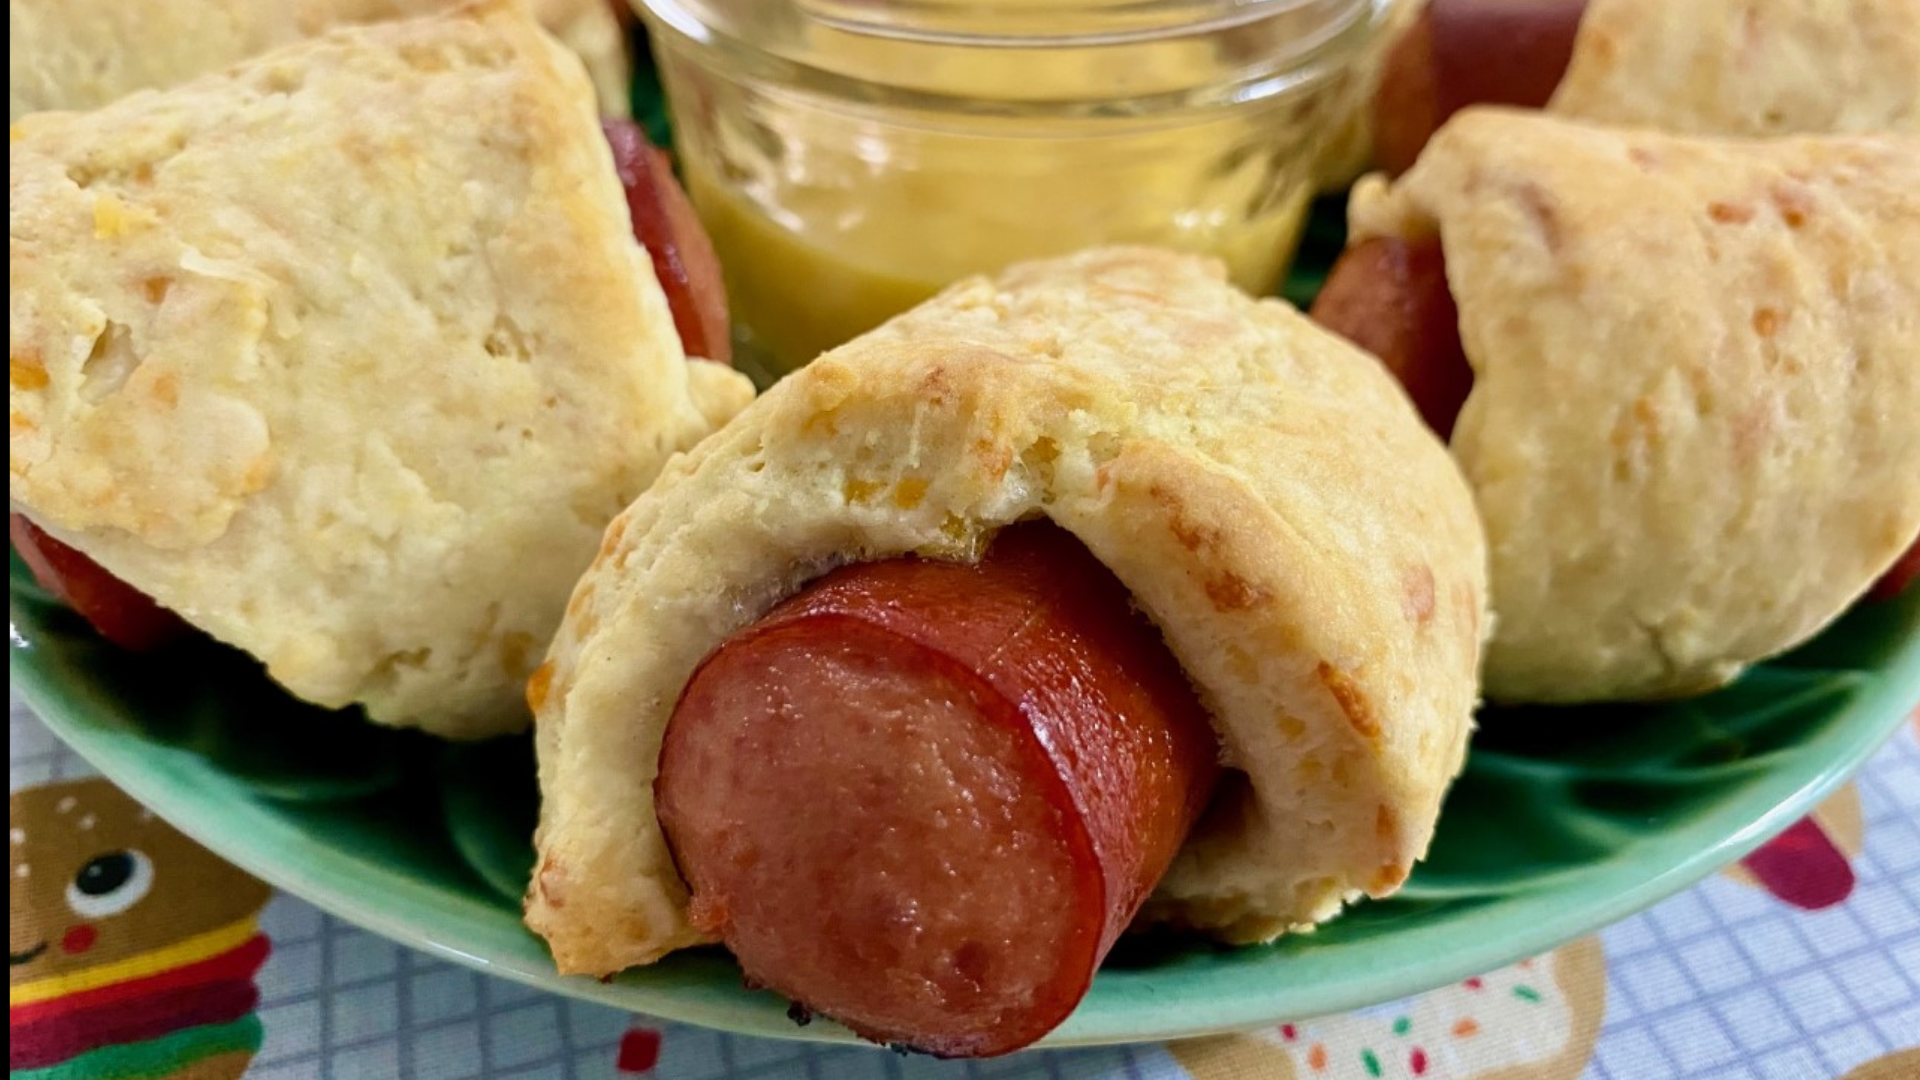 Growing up, we all had pigs in a blanket. Today, we're going to take them to the next level with my homemade pigs in a blanket!